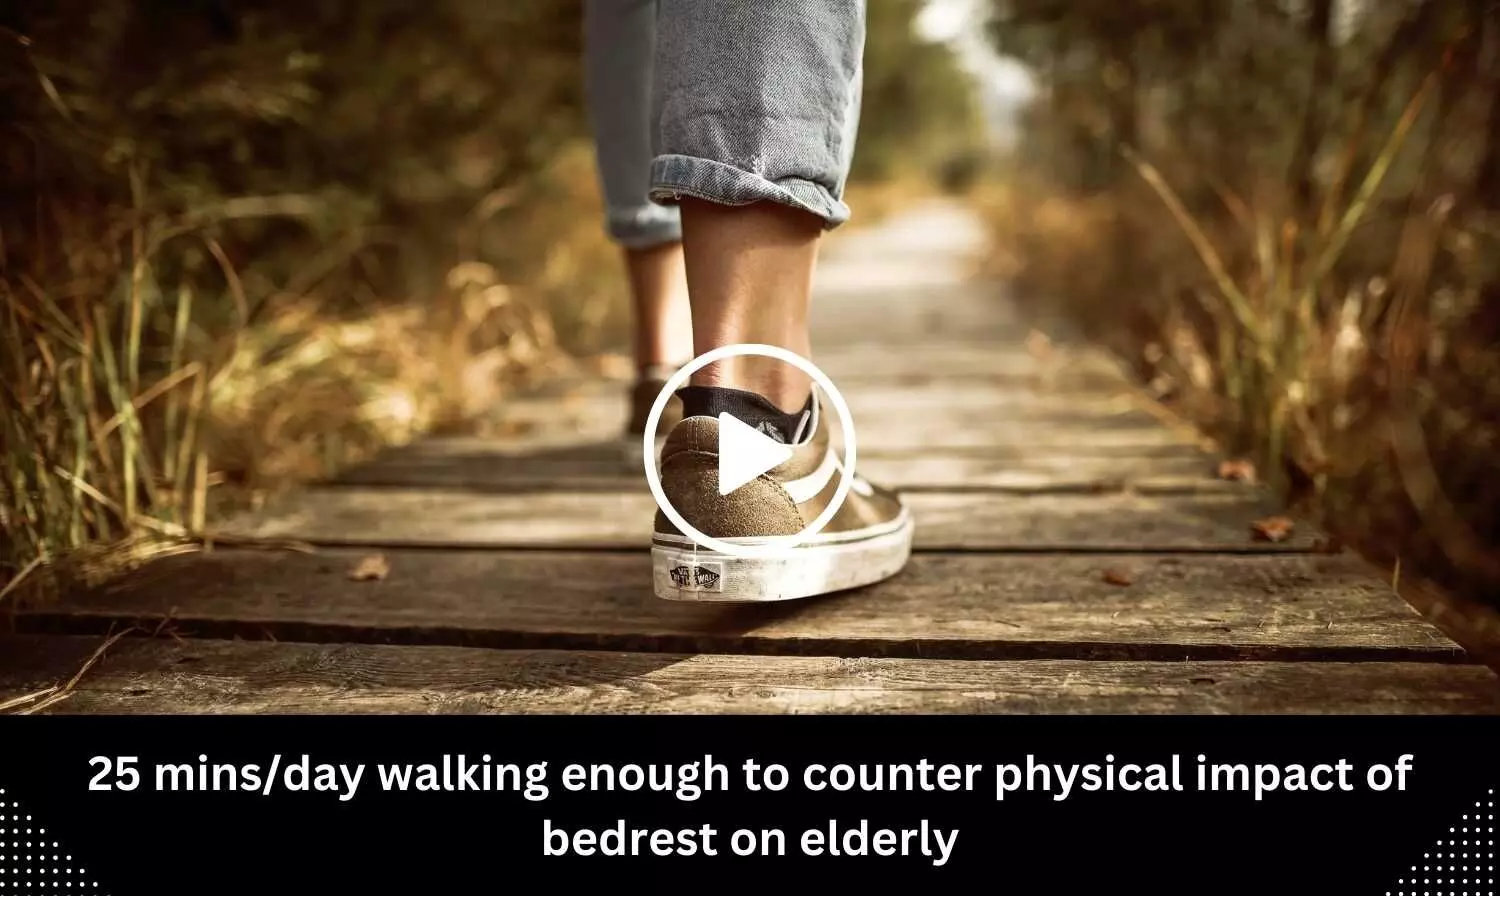 25 mins/day walking enough to counter physical impact of bedrest among elderly